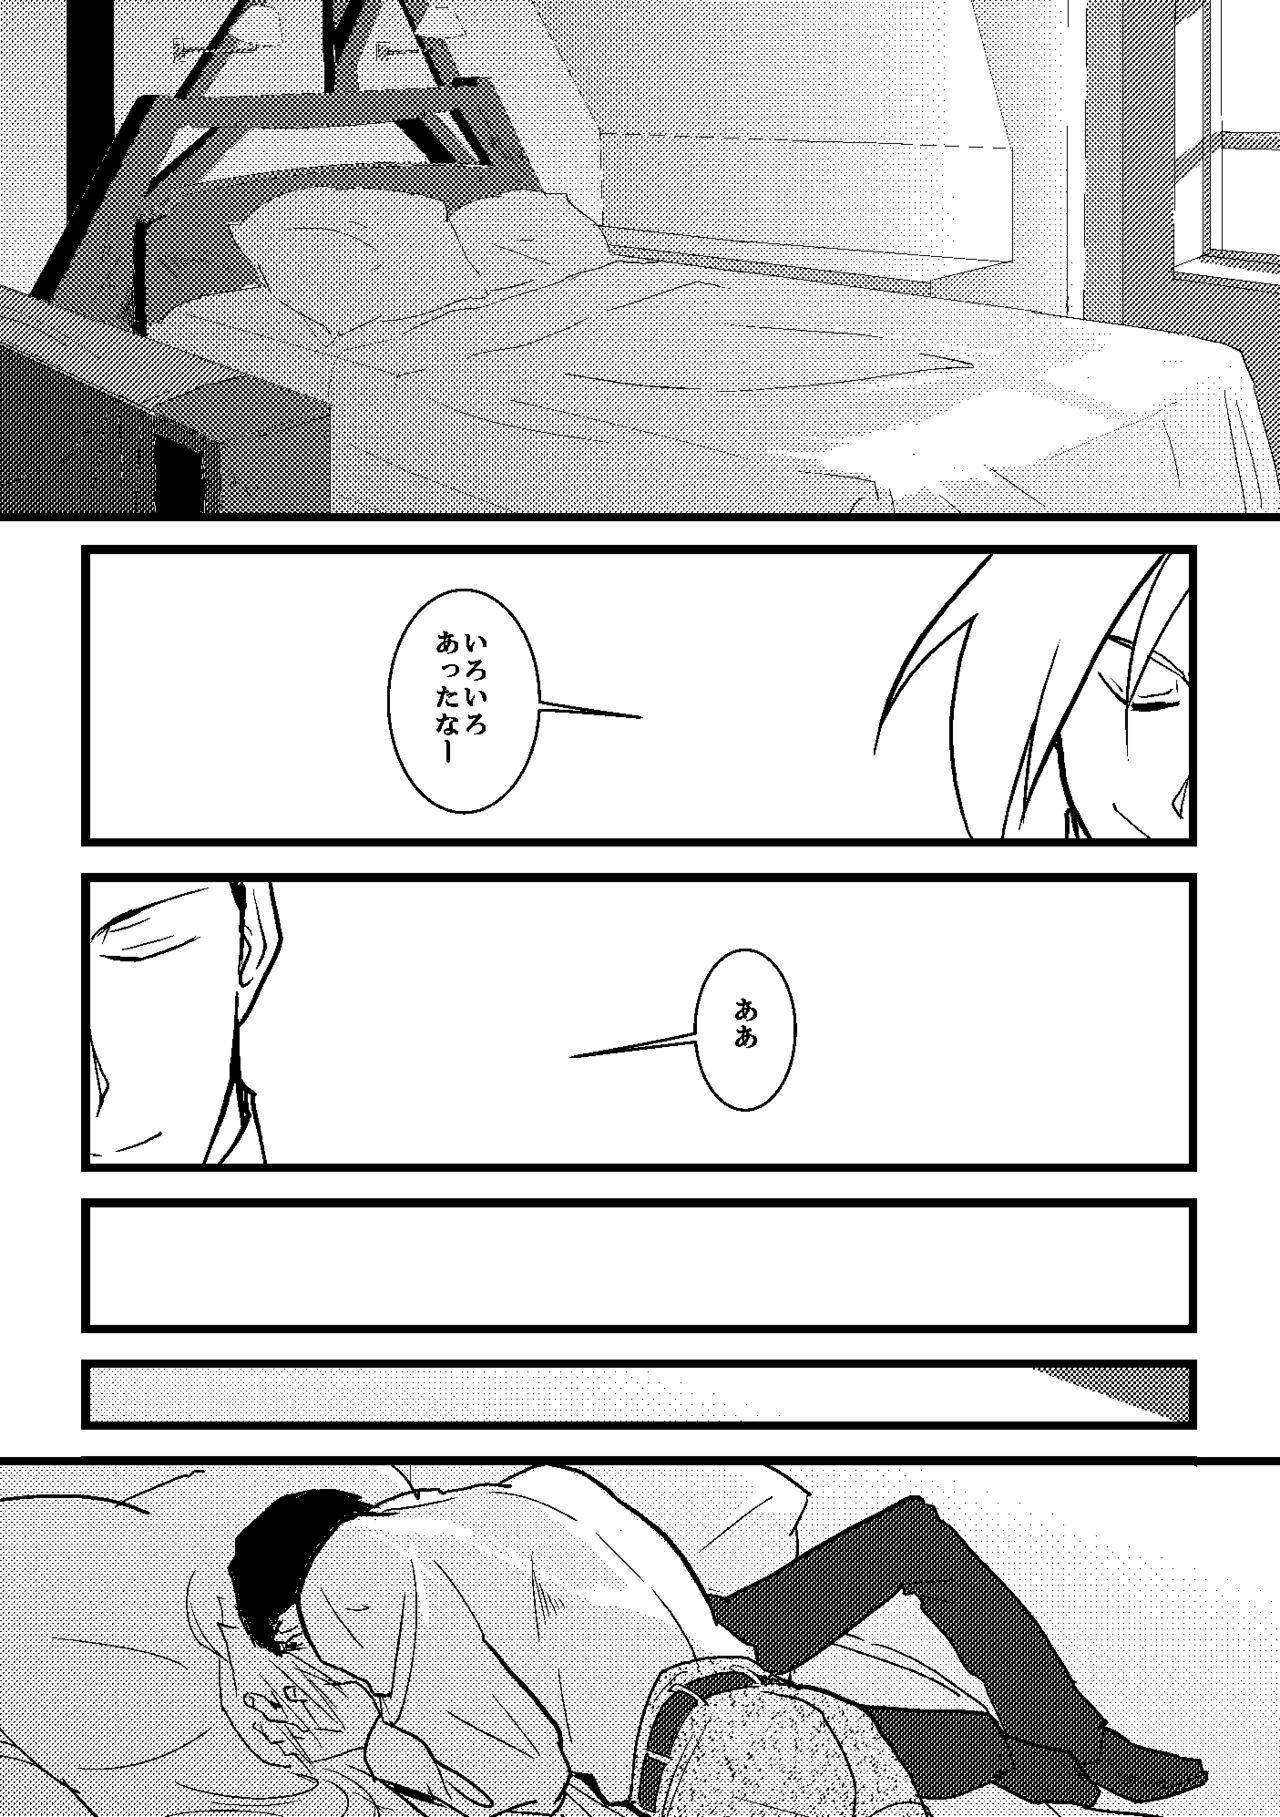 Butts After that and then - Fullmetal alchemist | hagane no renkinjutsushi Interacial - Page 5